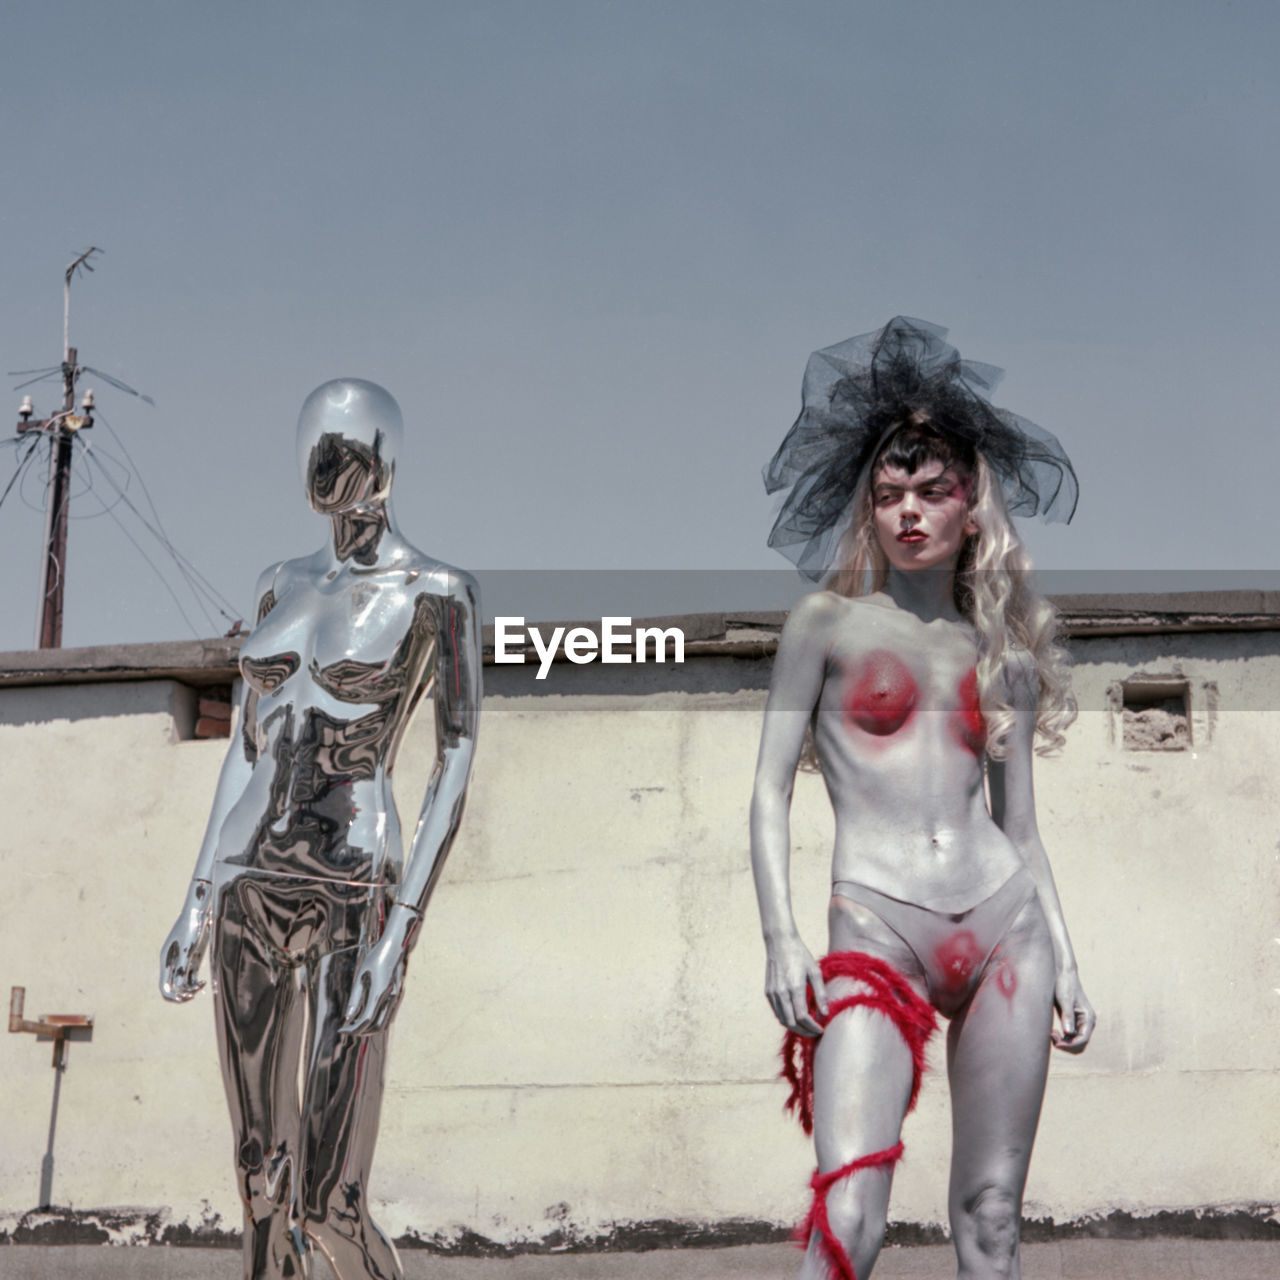 Naked woman with body paint standing against mannequin against sky